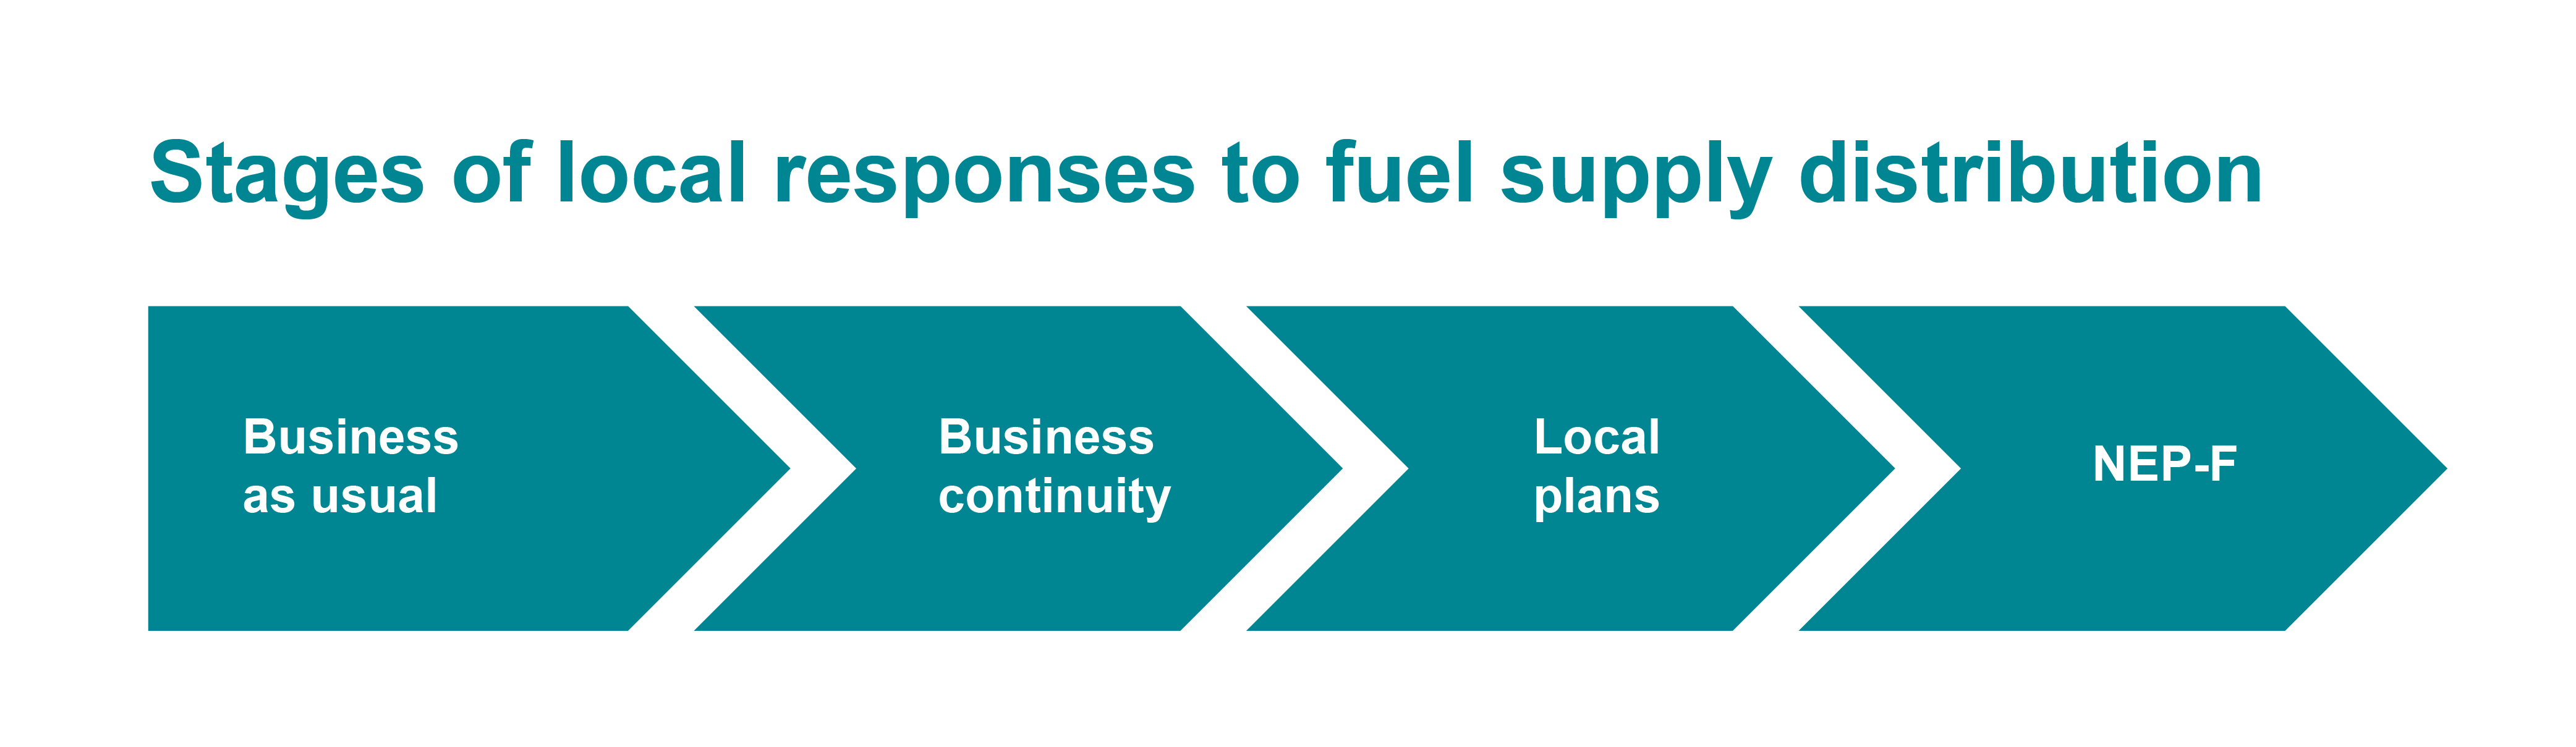 Stages of local responses to fuel supply distribution